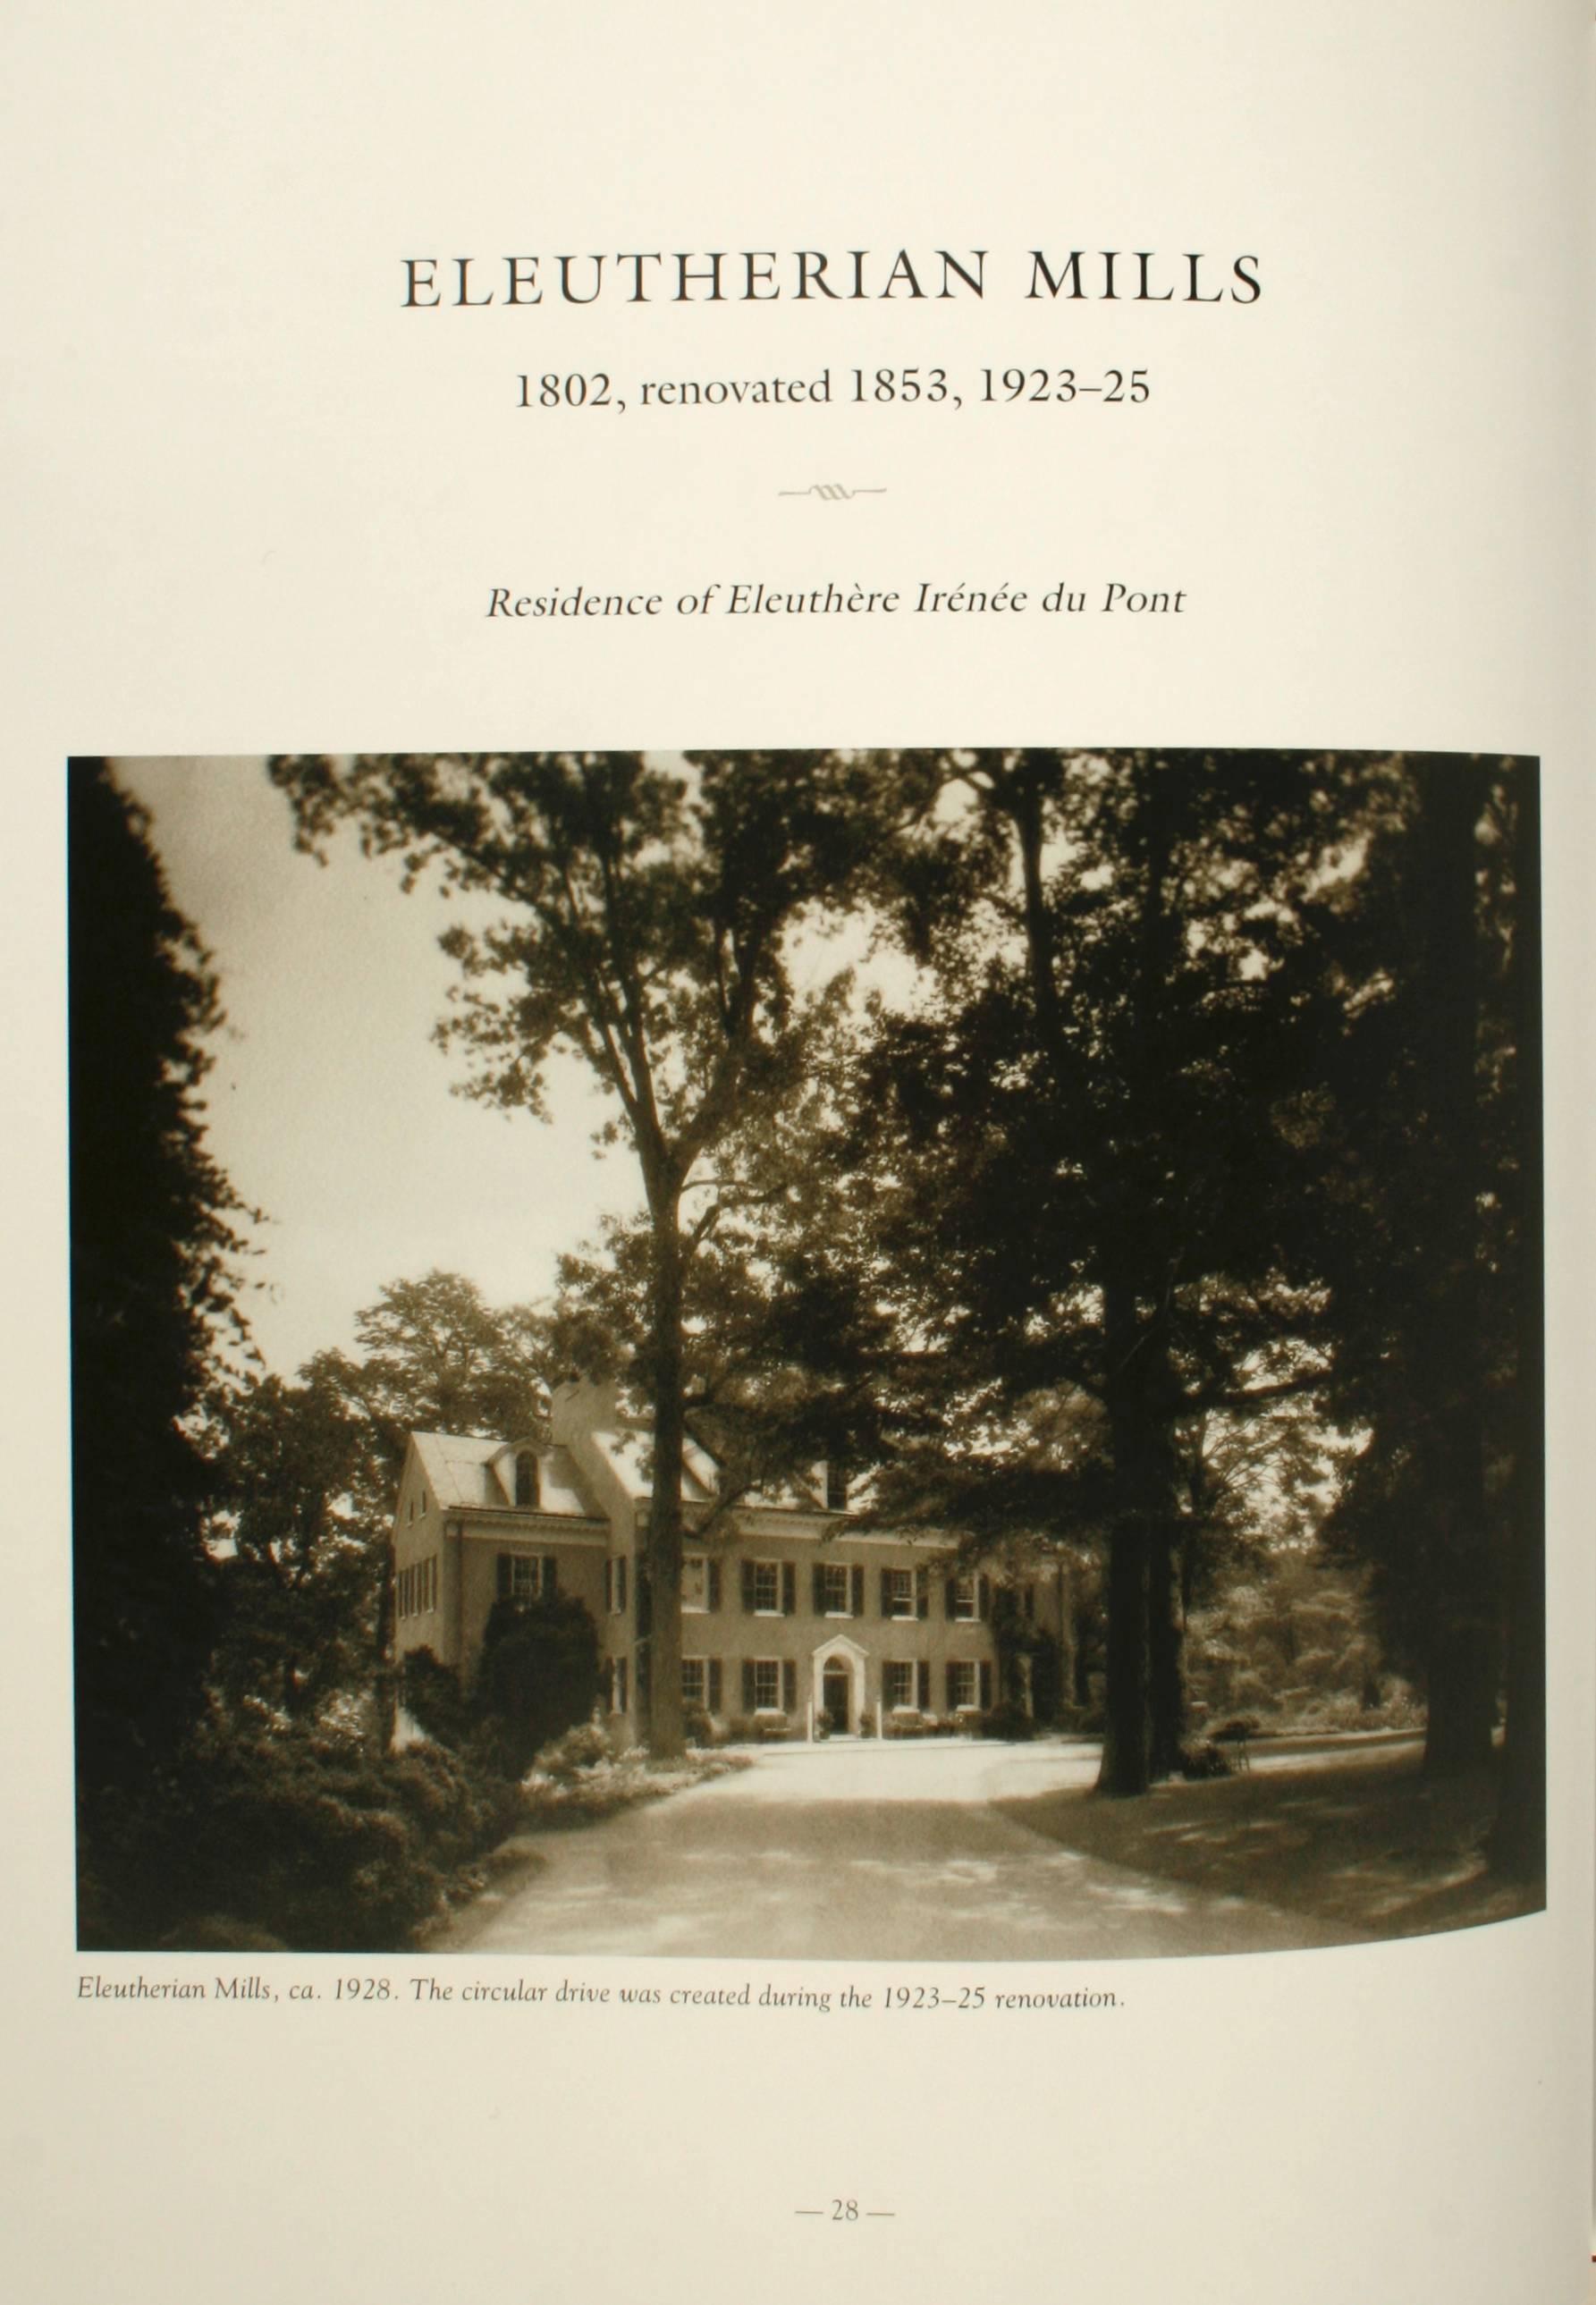 The du Ponts: Houses and gardens in the Brandywine by Maggie Lidz.
Acanthus Press, NY, 2009. 1st Ed hardcover with dust jacket. Featuring 25 of the du Pont family houses and farms, including: Winterthur, Longwood, Nemours, Bellevue, (a replica of